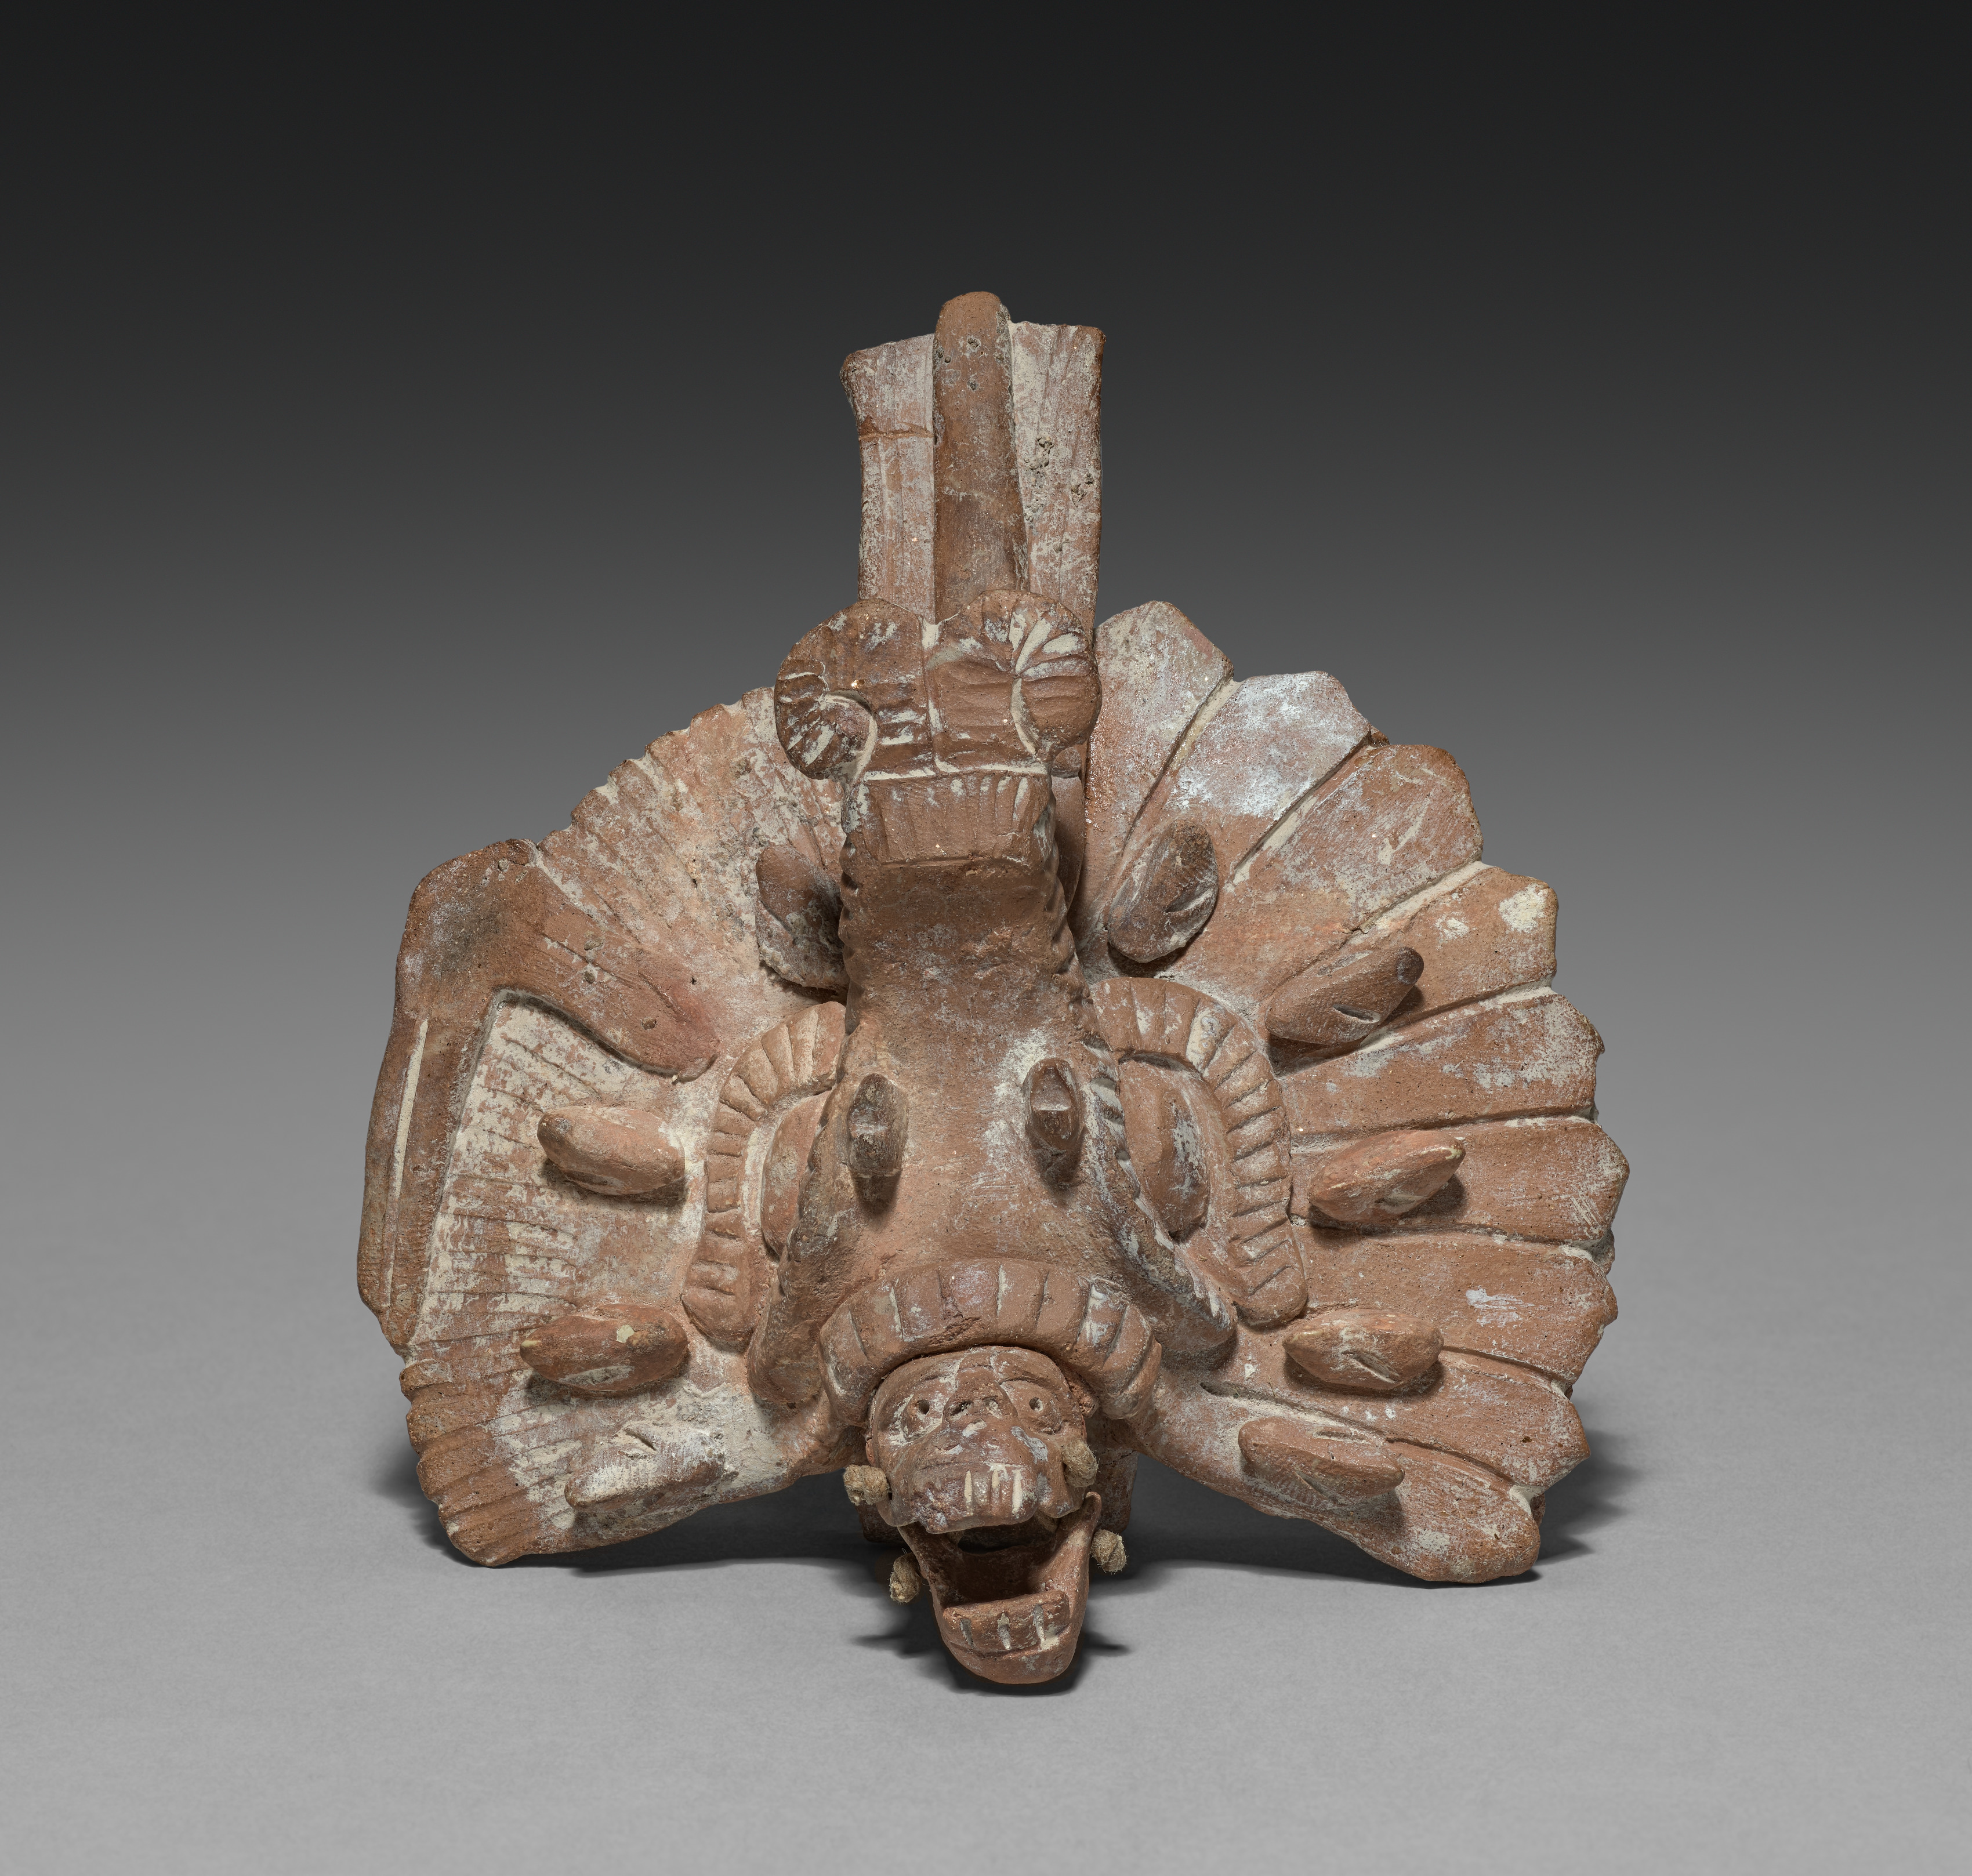 Seated Lord with Removable Headdress: Headdress